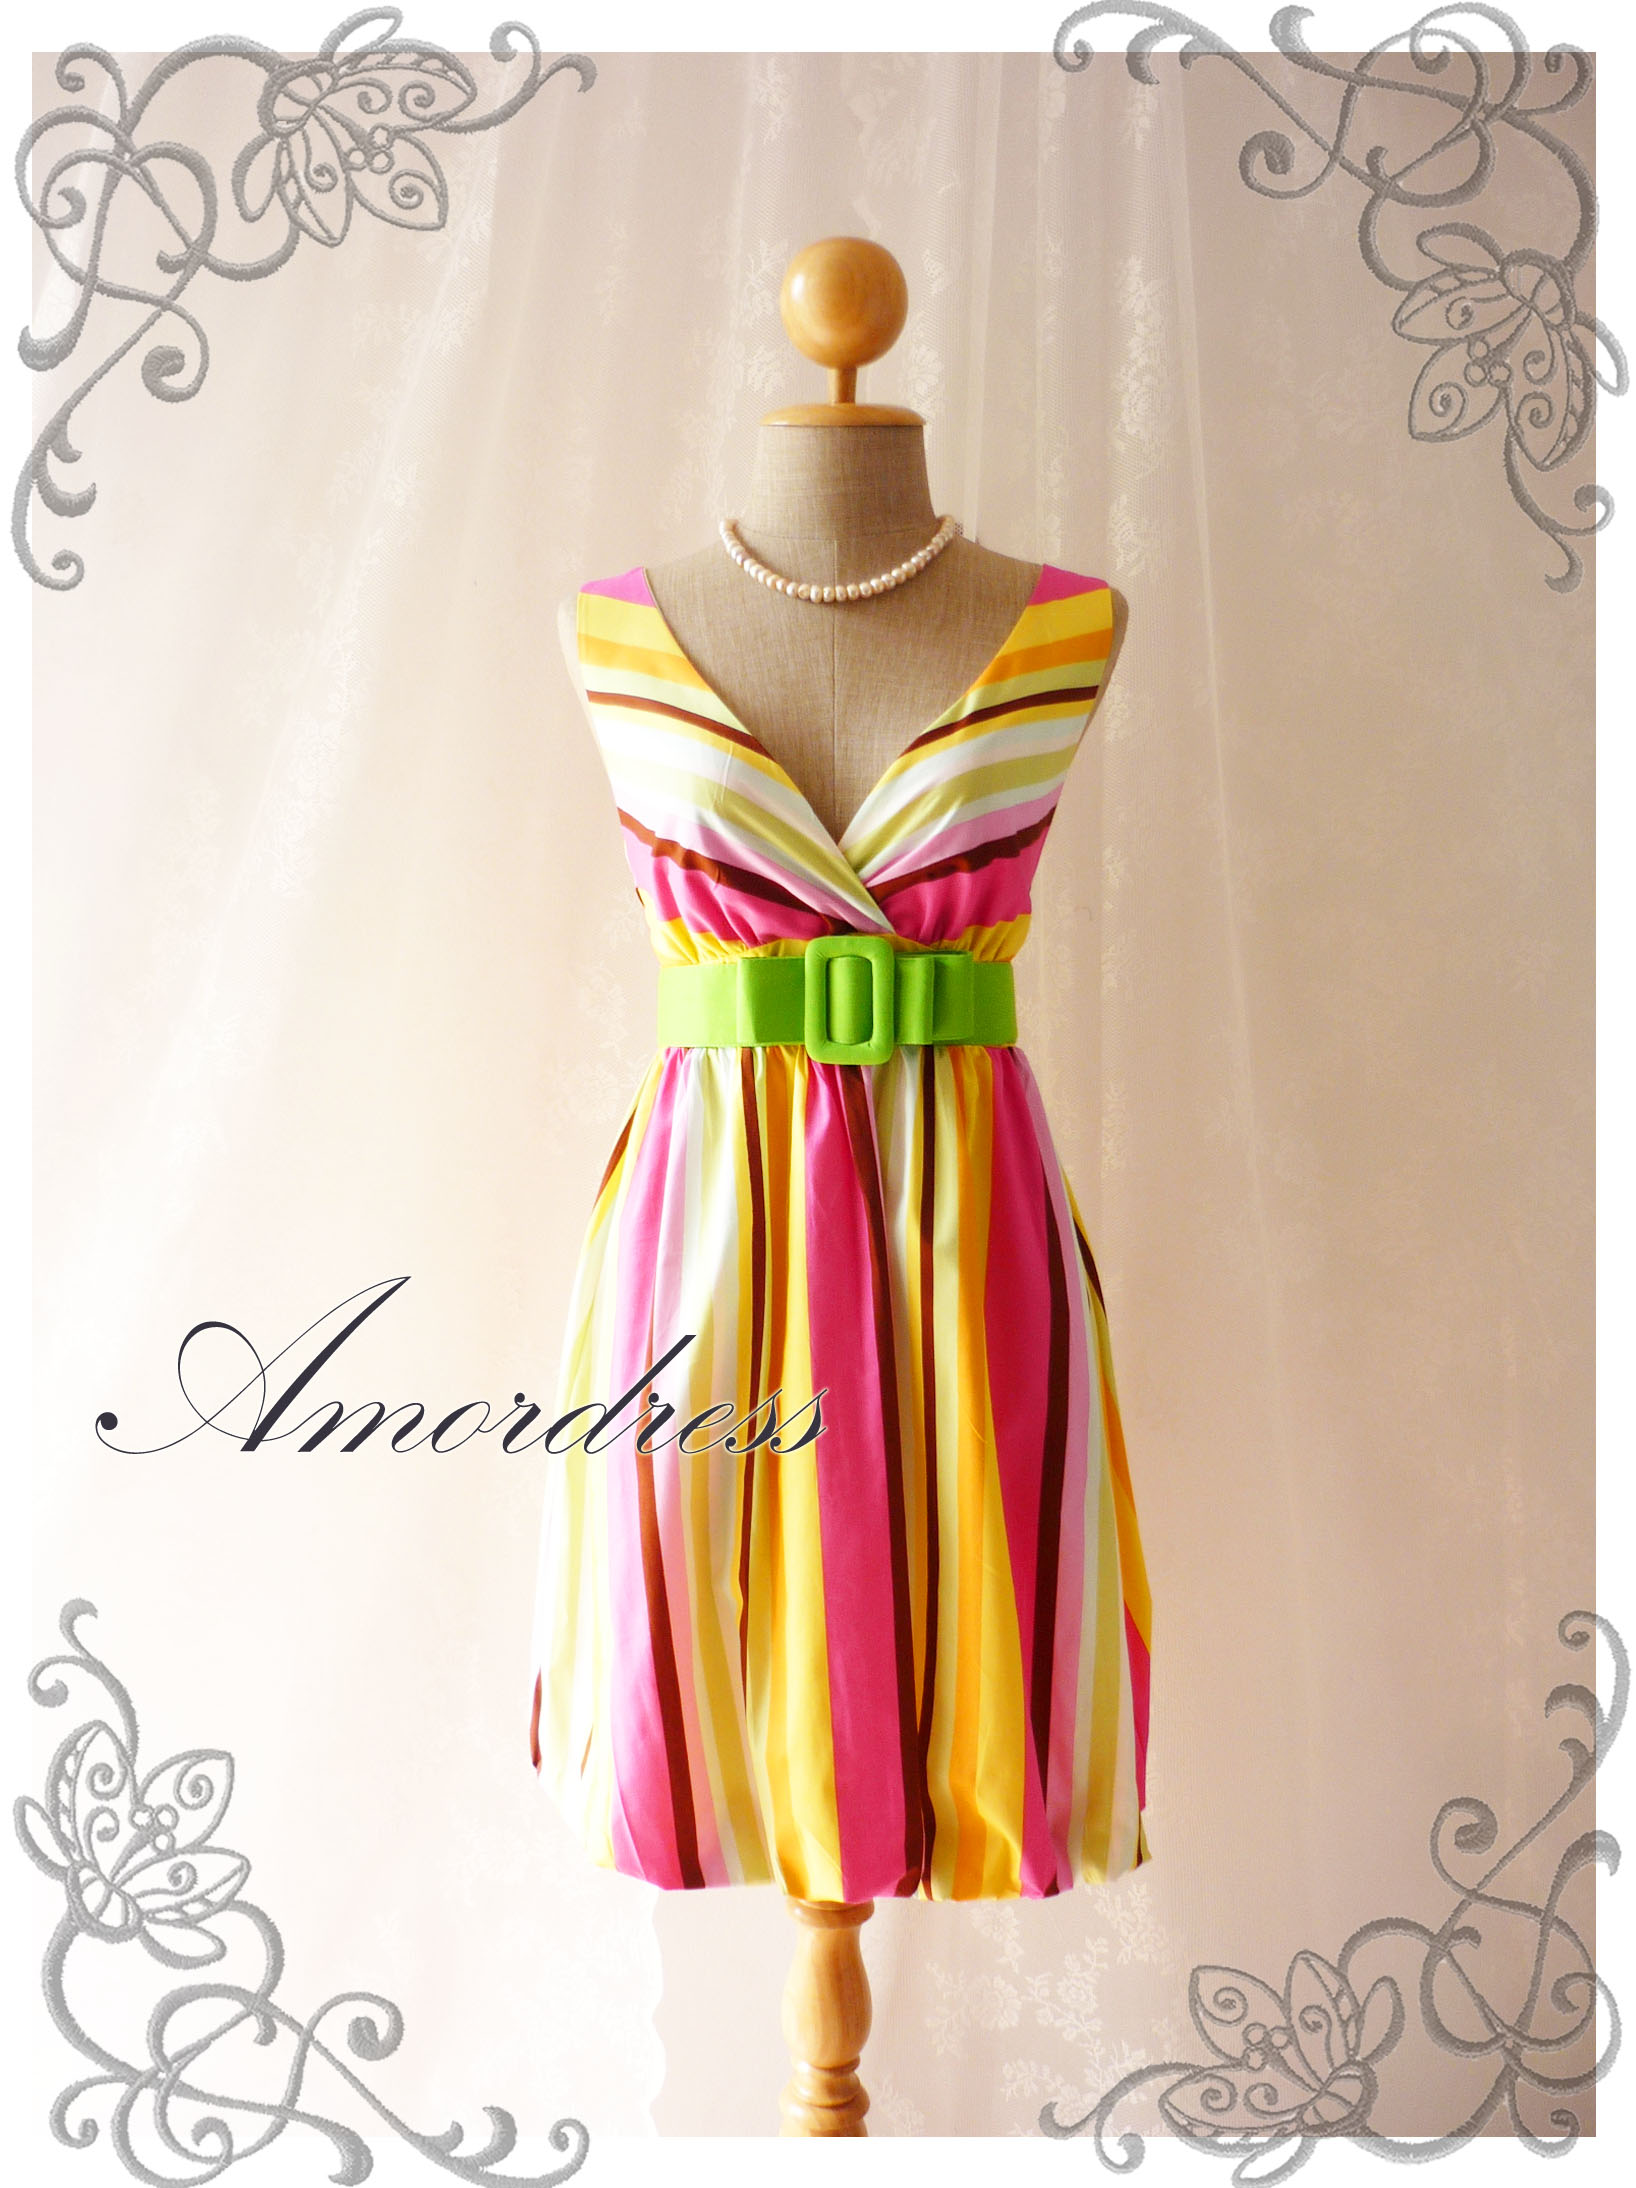 bright colored summer dresses